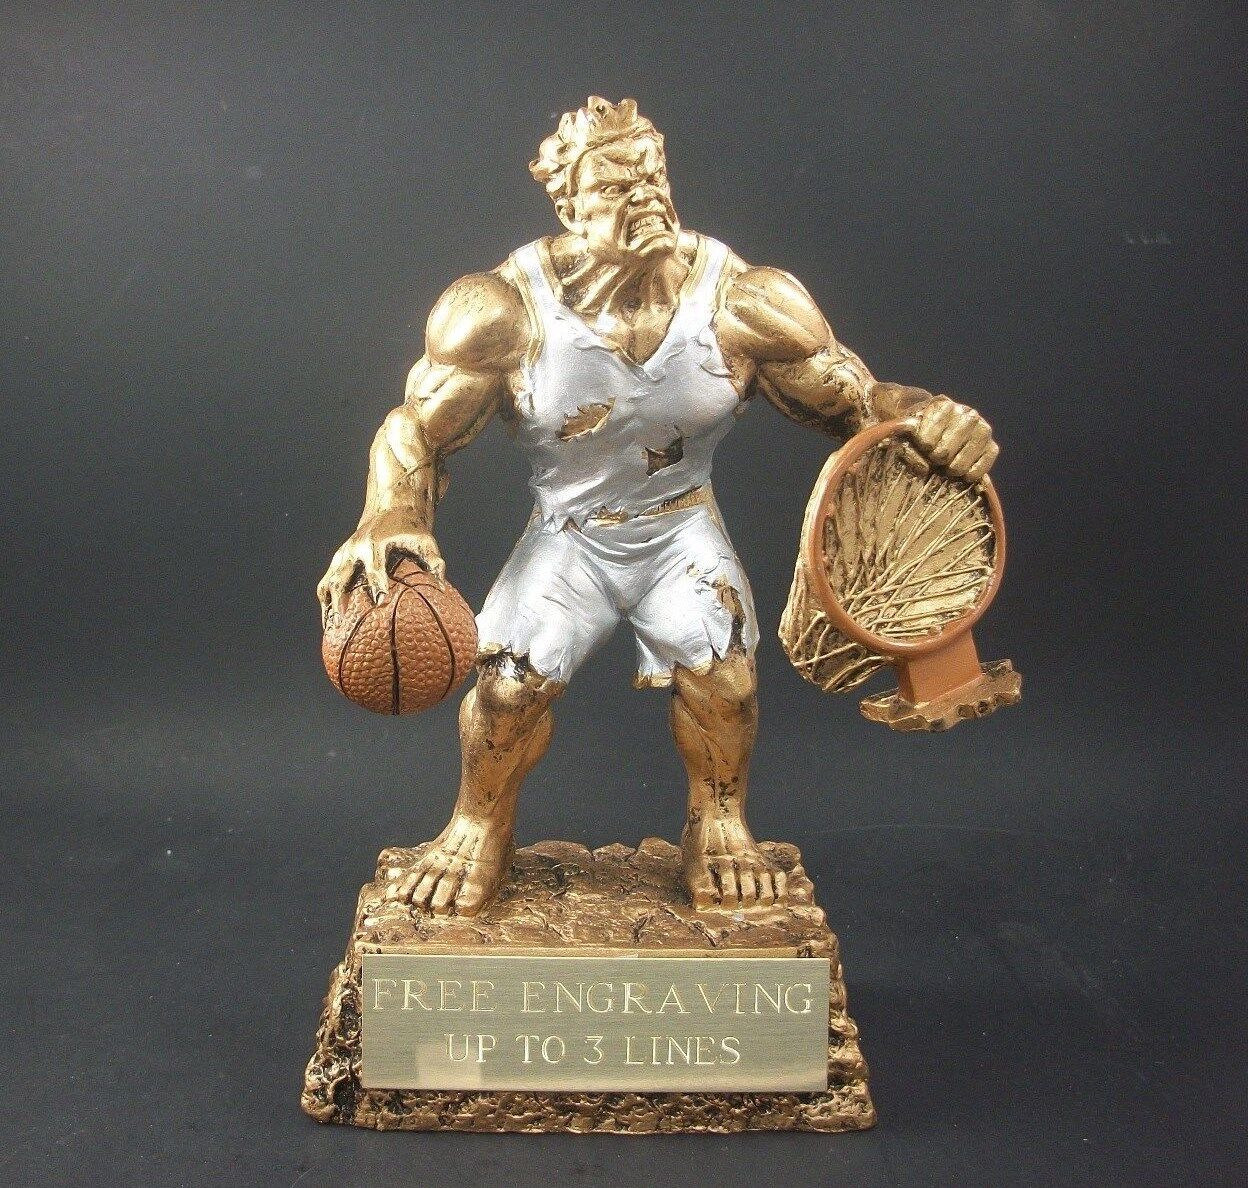 Basketball Monster Trophy. March Madness. Free Engraving.